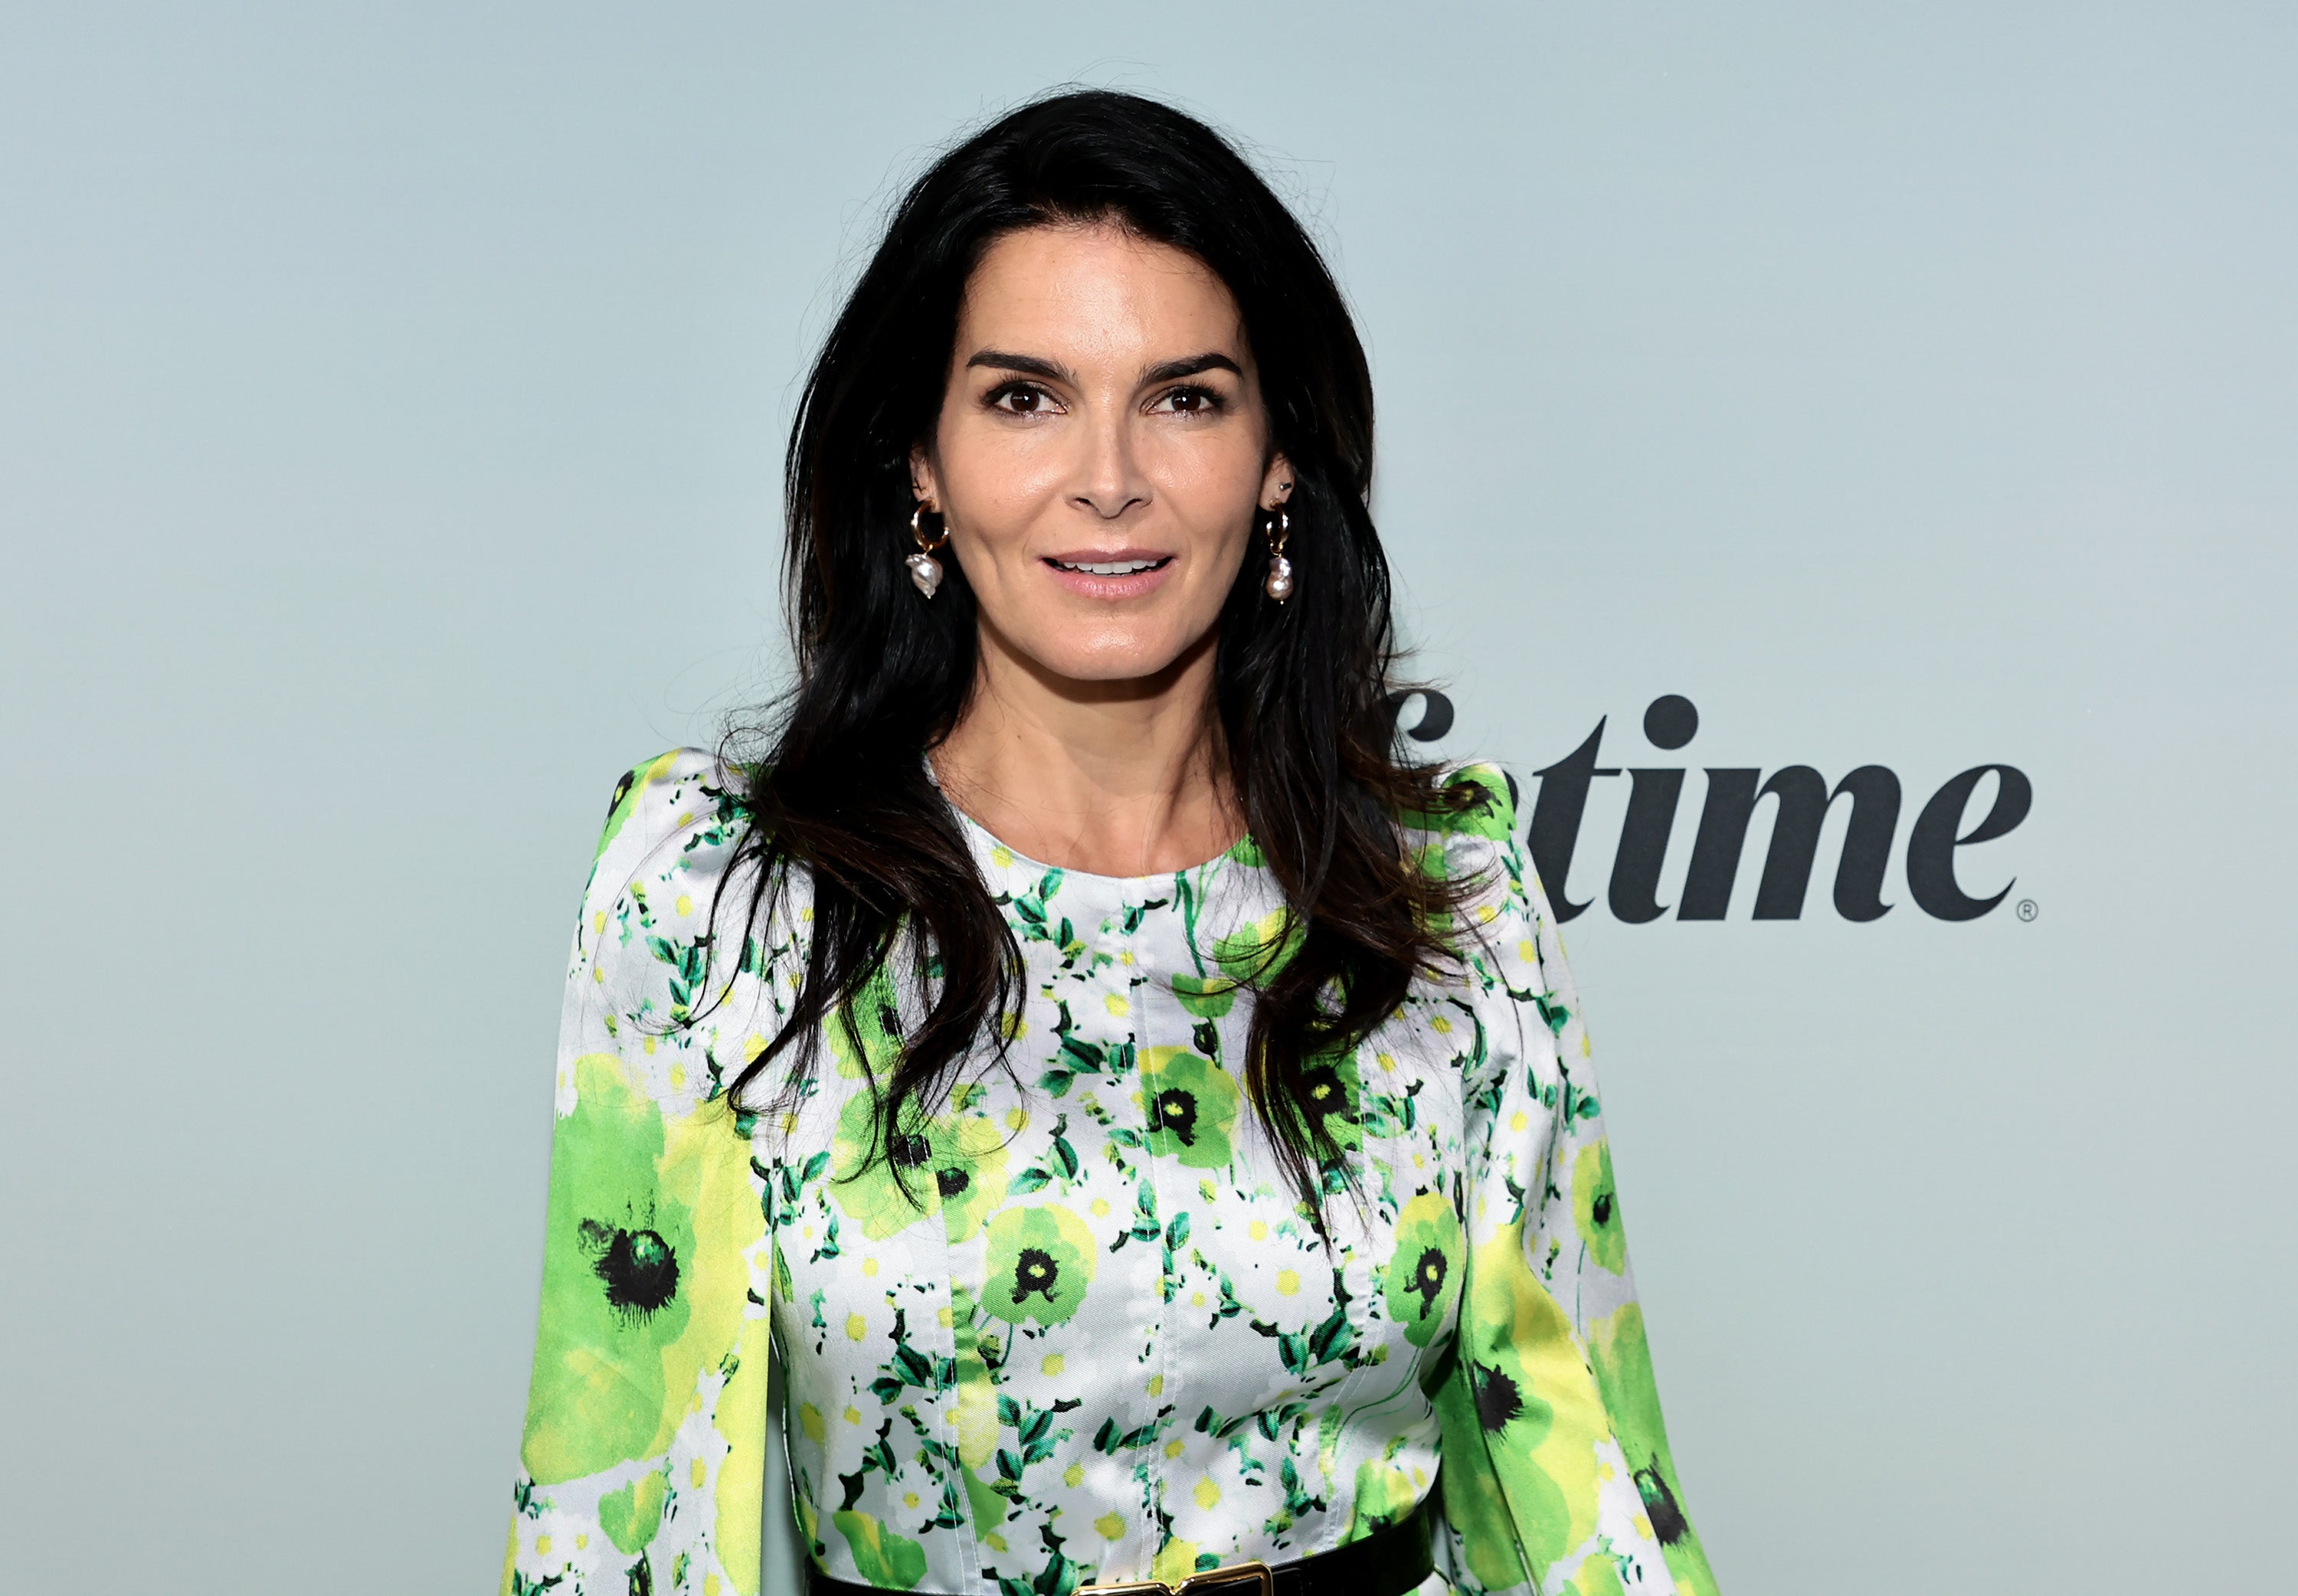 Angie Harmon, known for her roles in ‘Law & Order’ and ‘Rizzoli & Isles’, in 2022